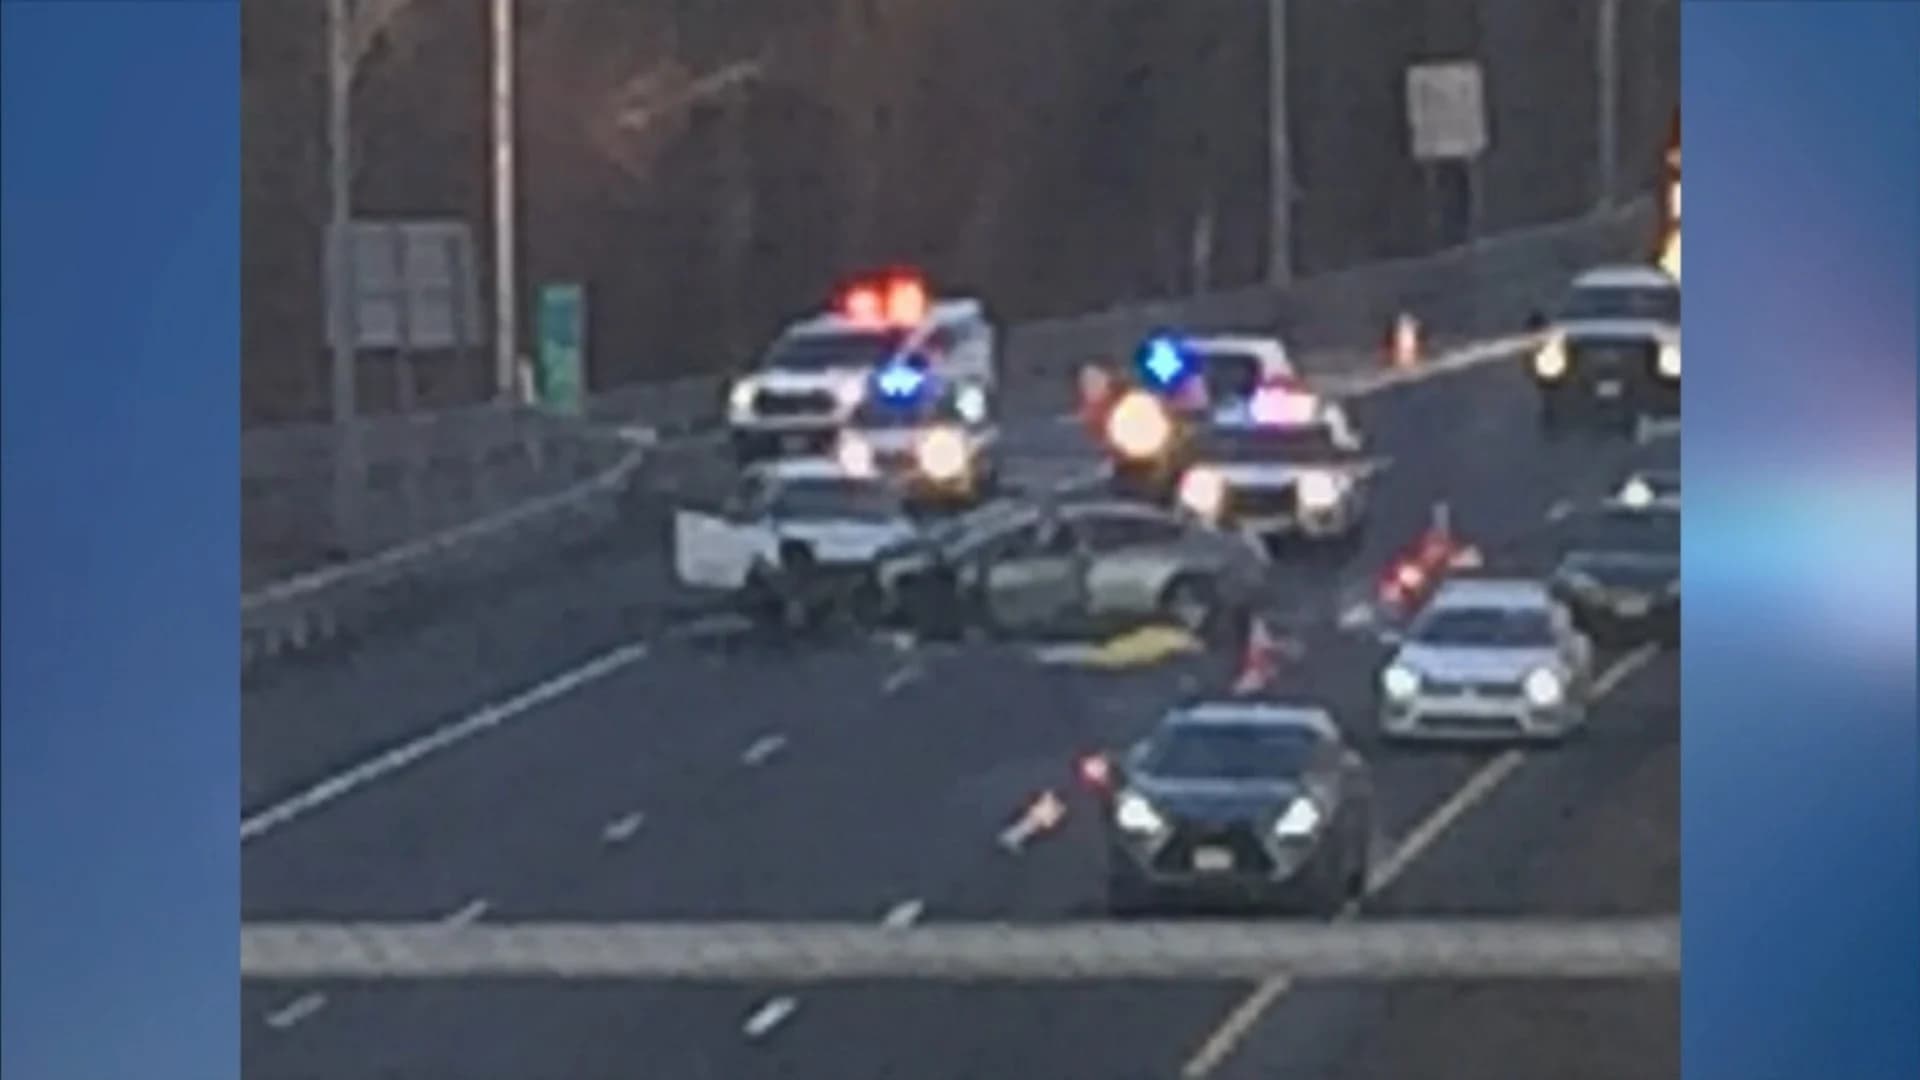 State police confirm fatality following serious two-car crash on I-78